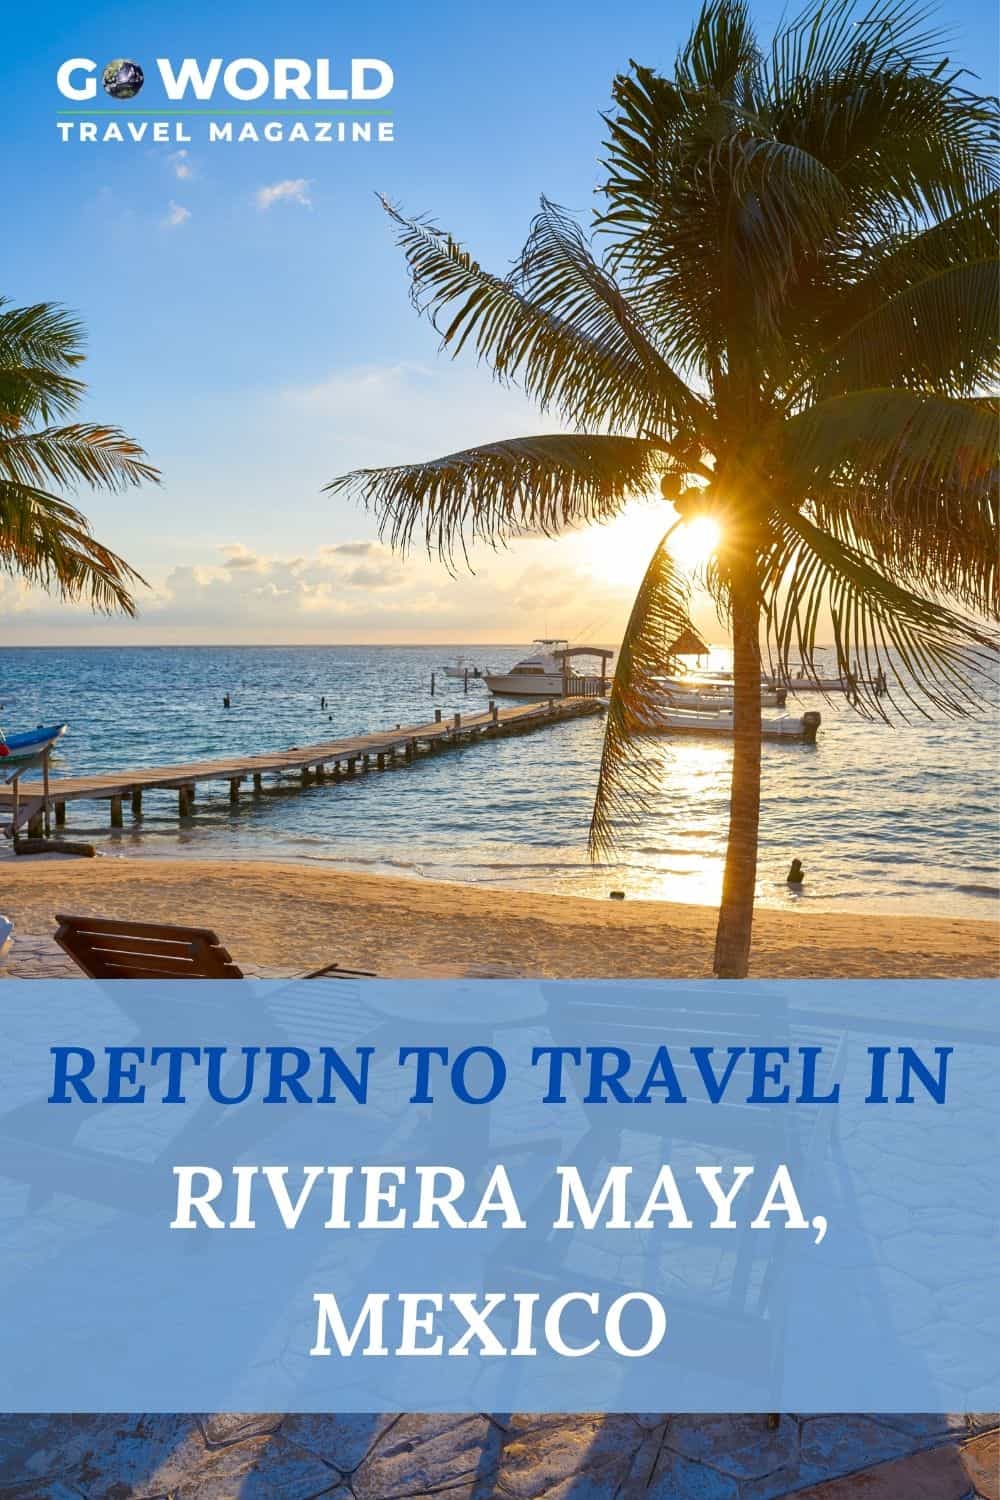 As the world starts to open up where is the best place to travel post pandemic? Read about a couple's recent experience in Riviera Maya, Mexico. #MexicoTravel #RivieraMaya #MexicoBeaches